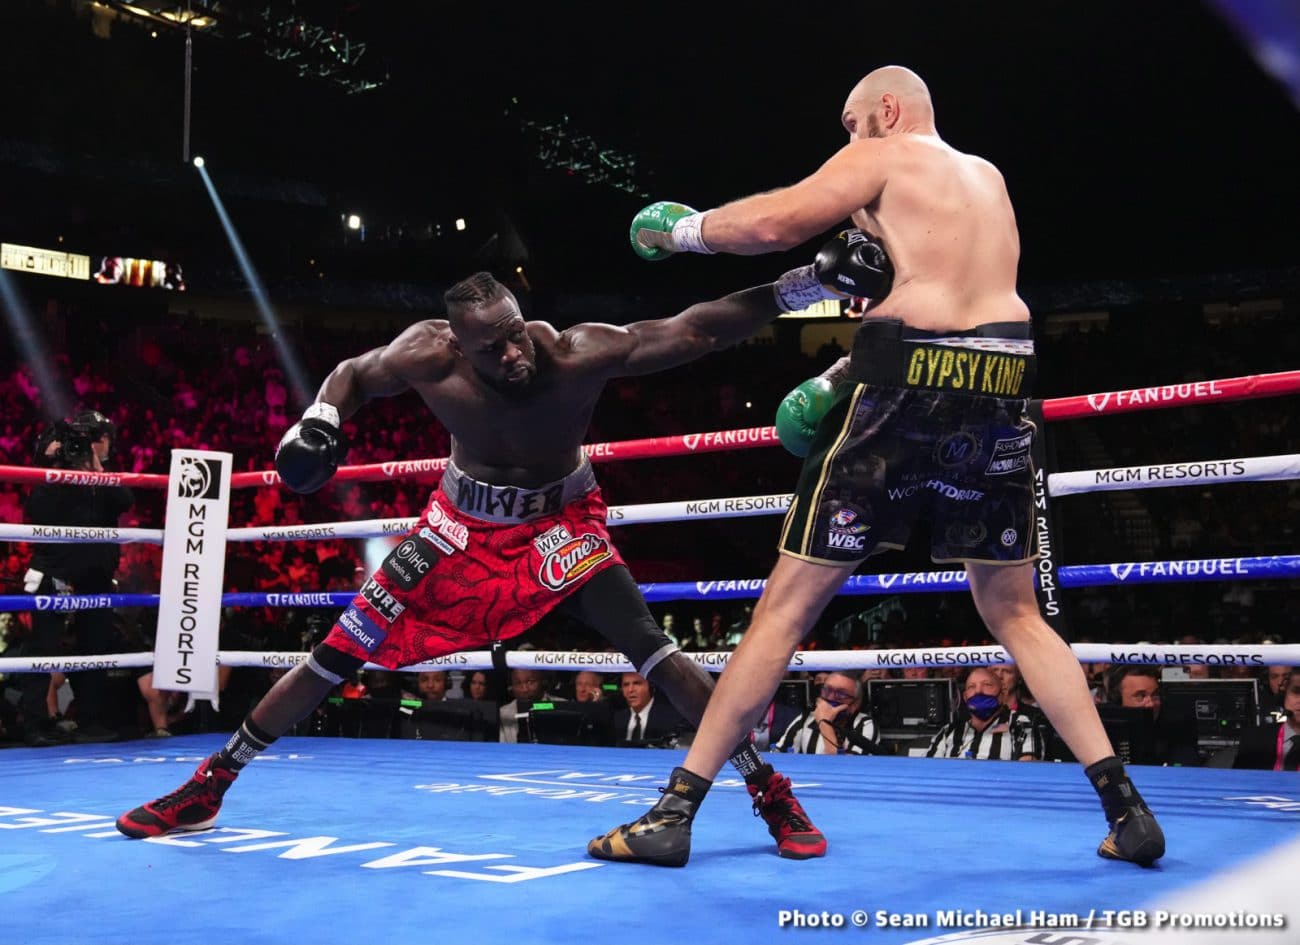 Image: Bob Arum on Tyson Fury's victory over Deontay Wilder: "Best heavyweight fight I've ever seen"